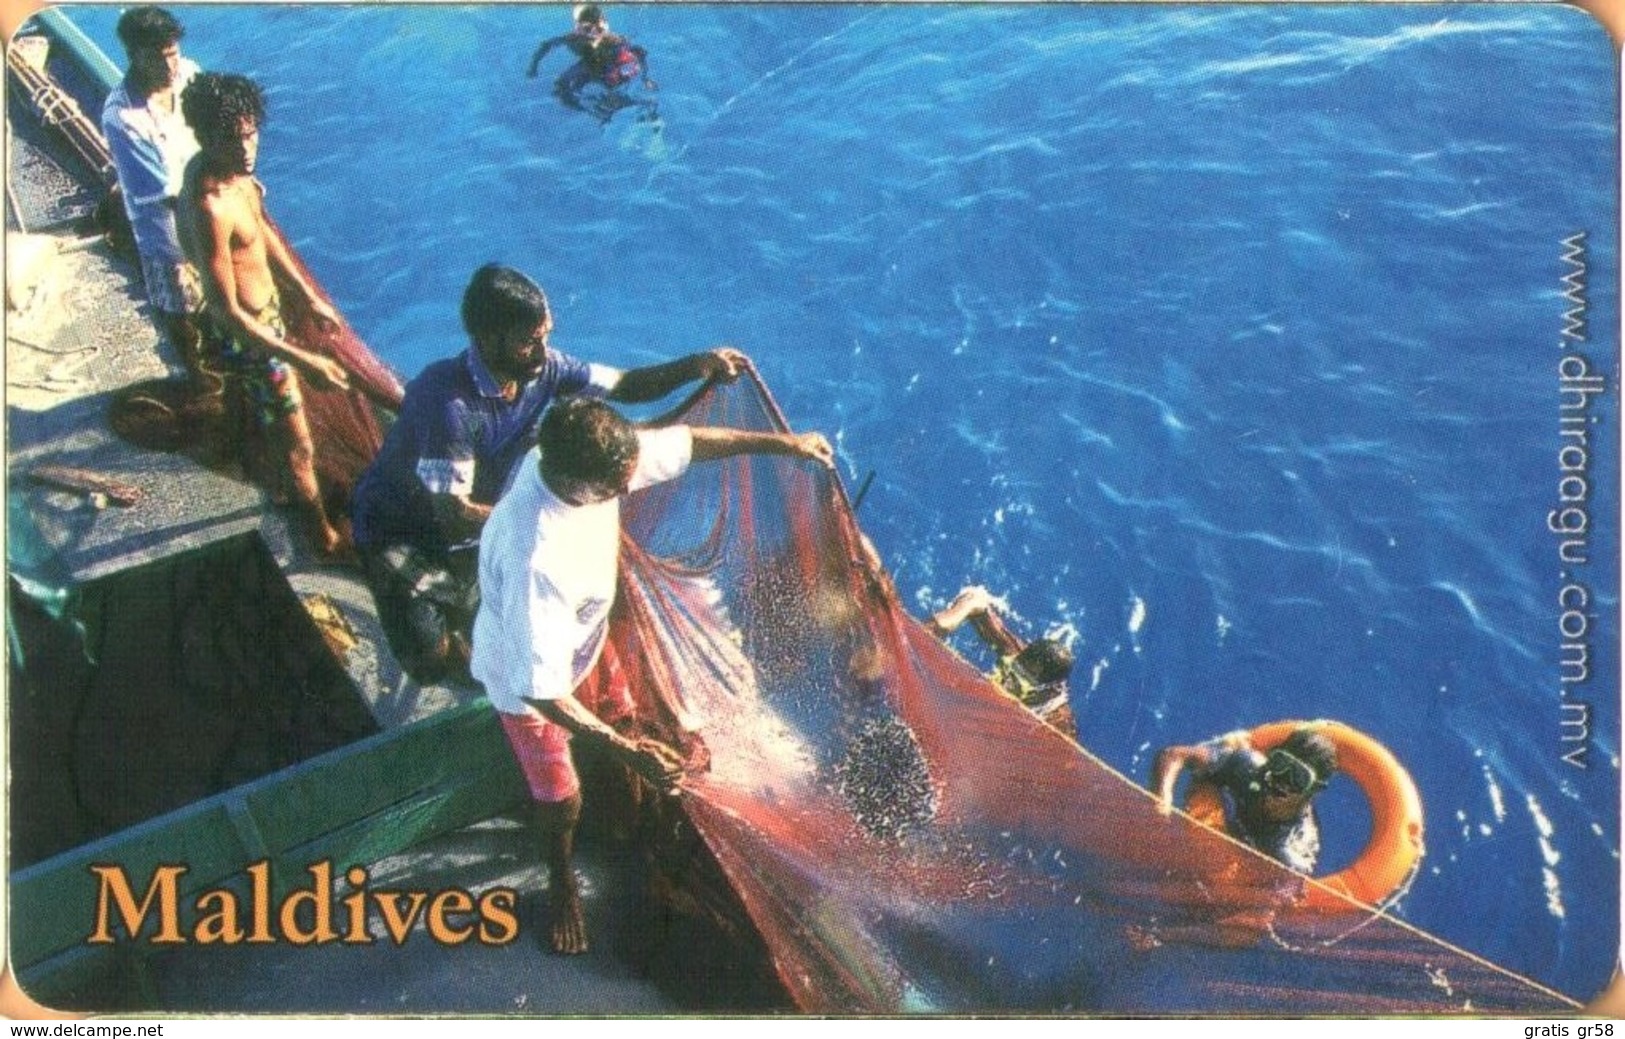 Maldives - MAL-C-23A, Fishermen And Swimmers, Fishery, 2/02, Used As Scan - Maldive